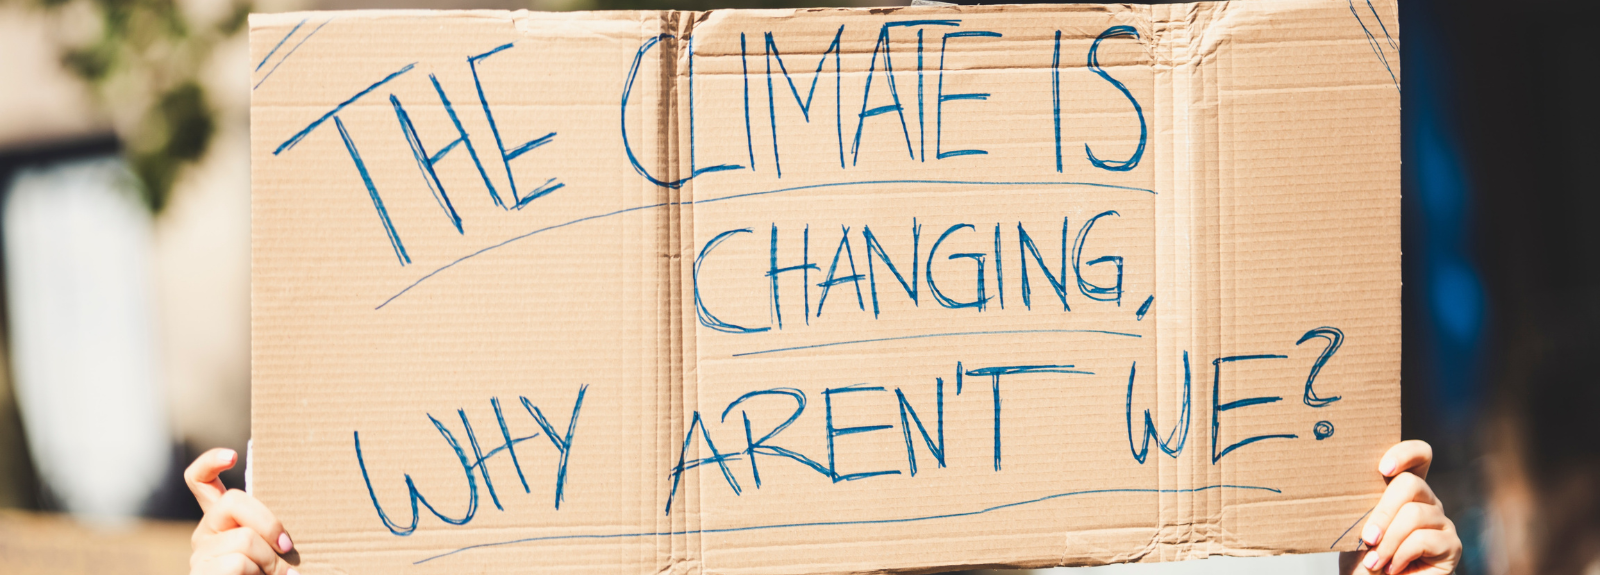 Cardboard sign saying 'The climate is changing, why aren't we?'